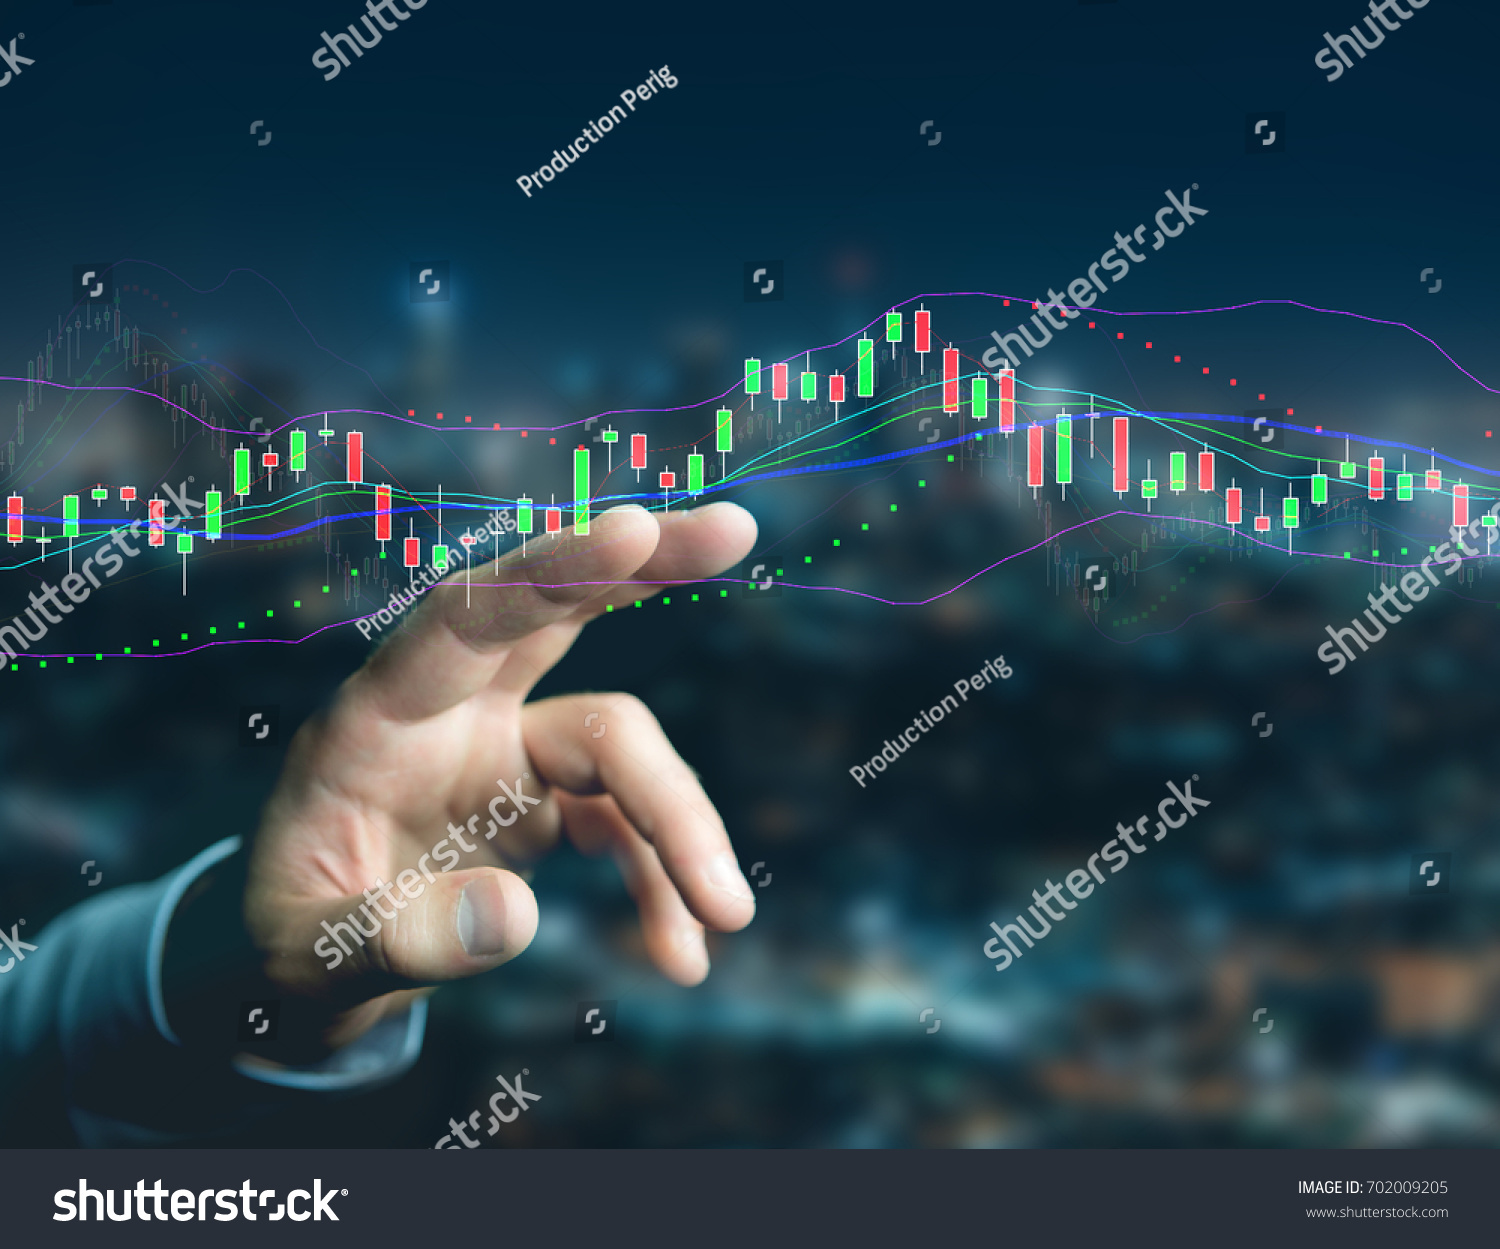 View of a Trading forex data information displayed on a stock exchange interface - Finance concept #702009205